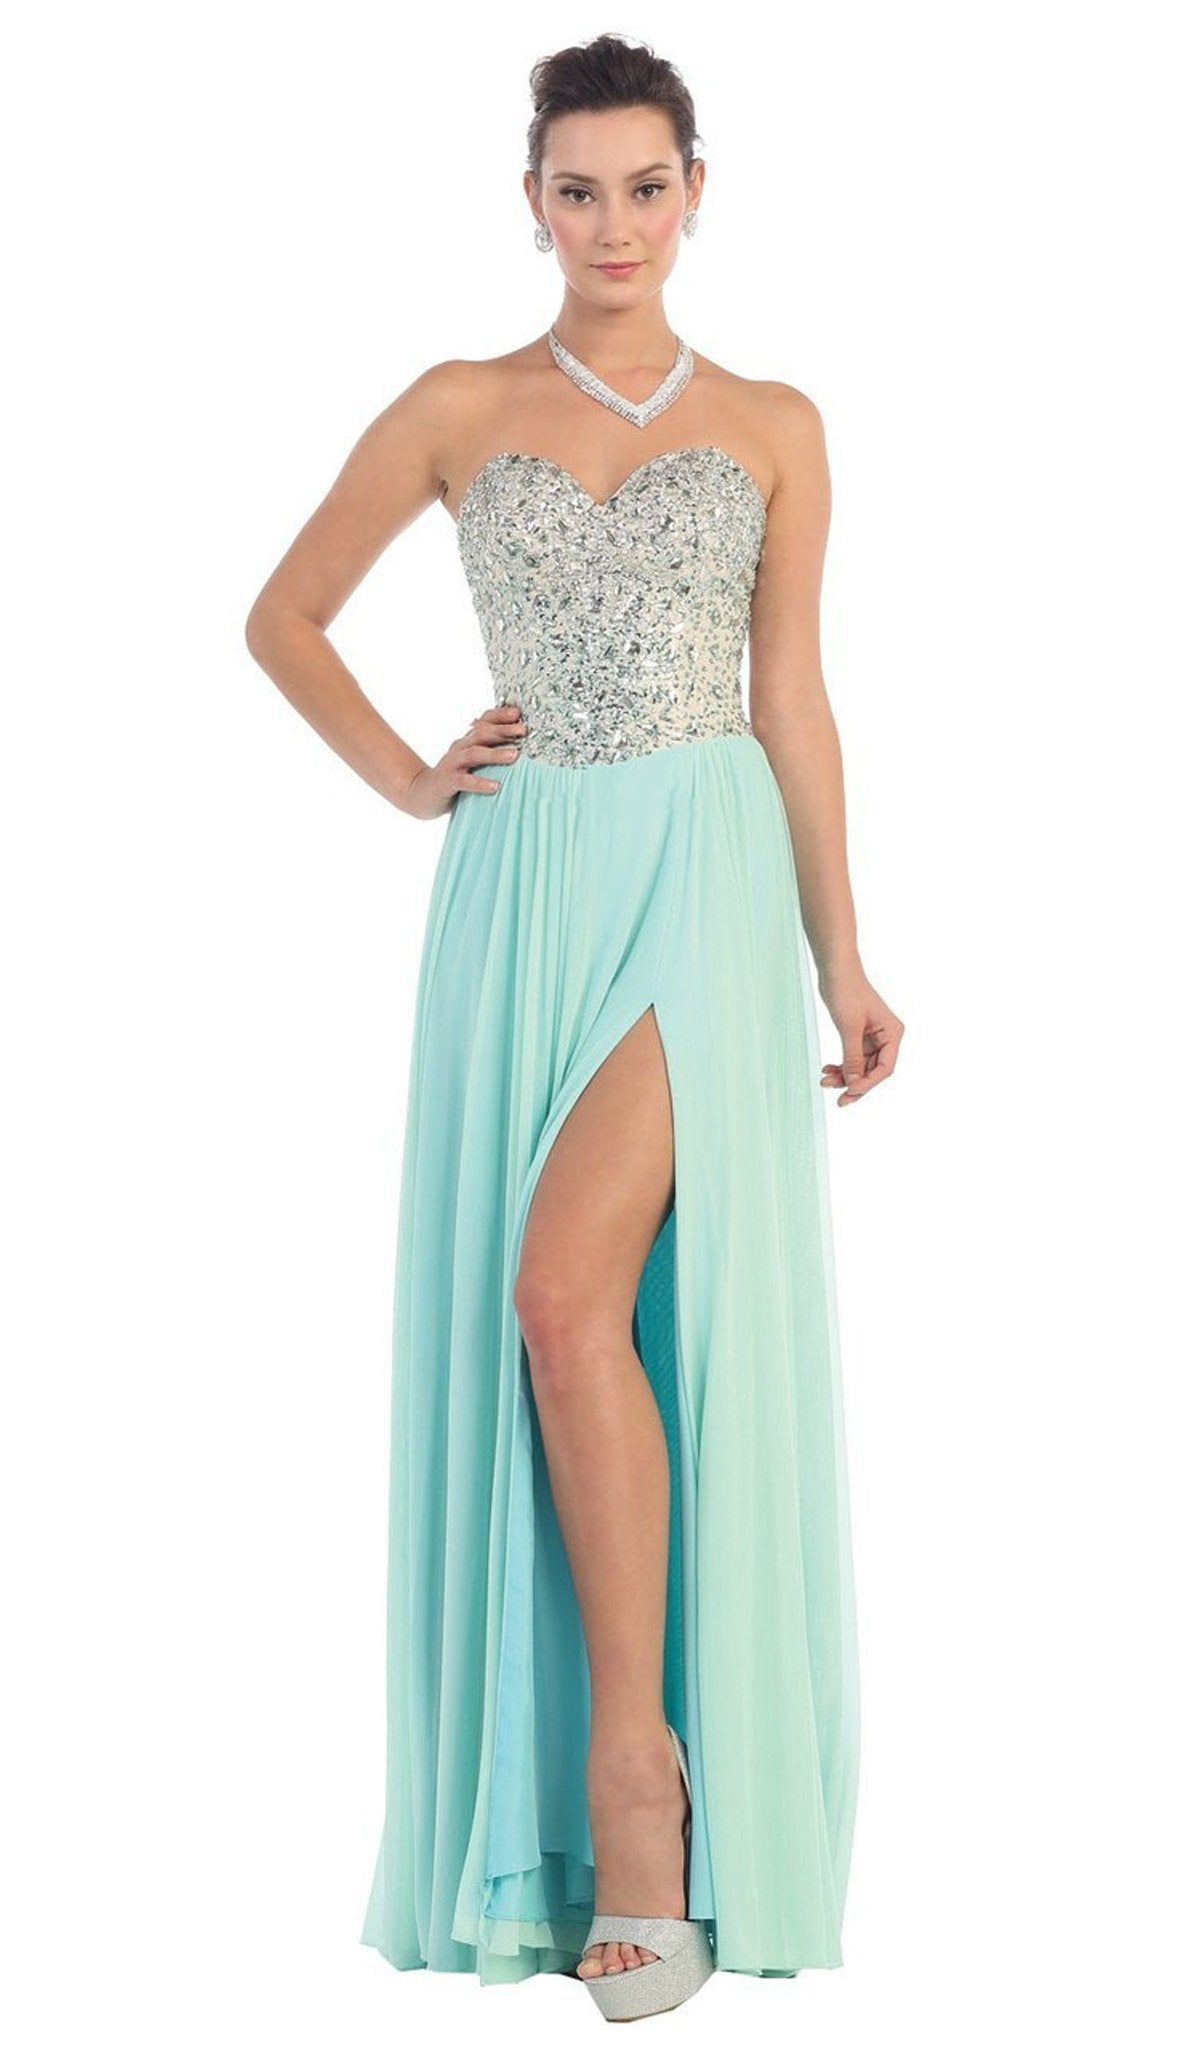 May Queen - Bedazzled Sweetheart A-line Prom Dress Special Occasion Dress 4 / Aqua